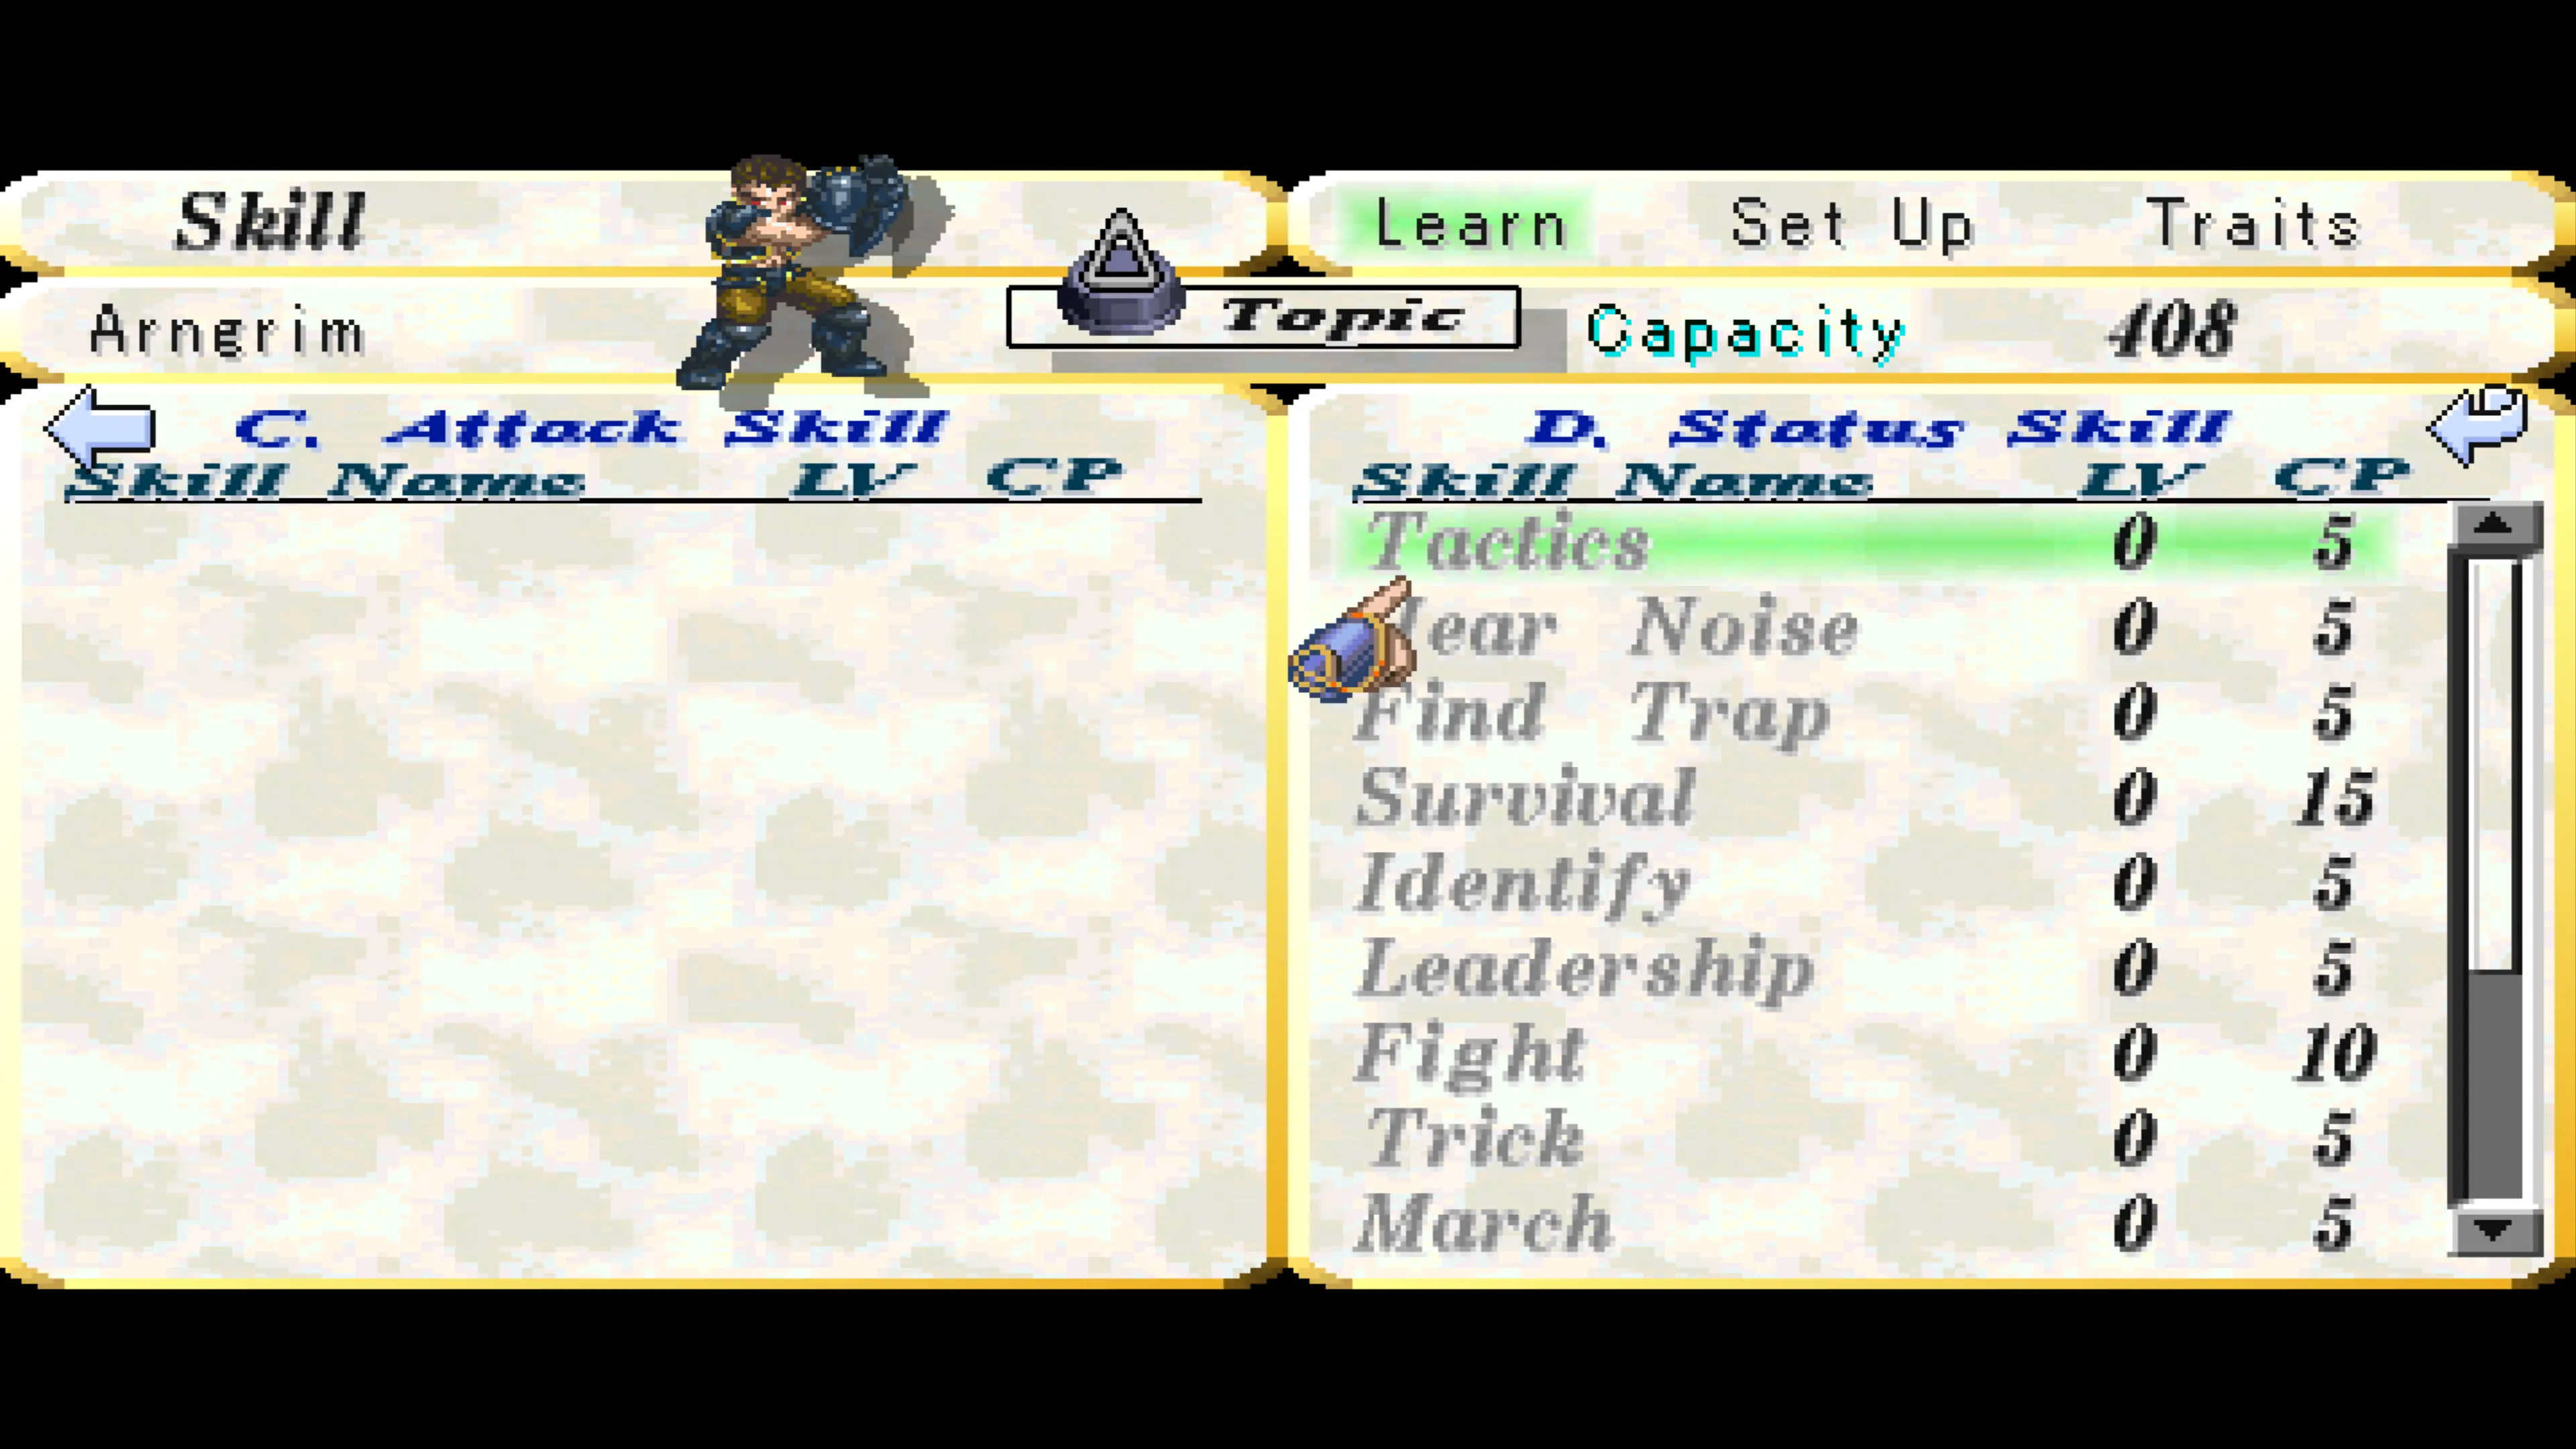 Valkyrie Profile showing various skills a character may have